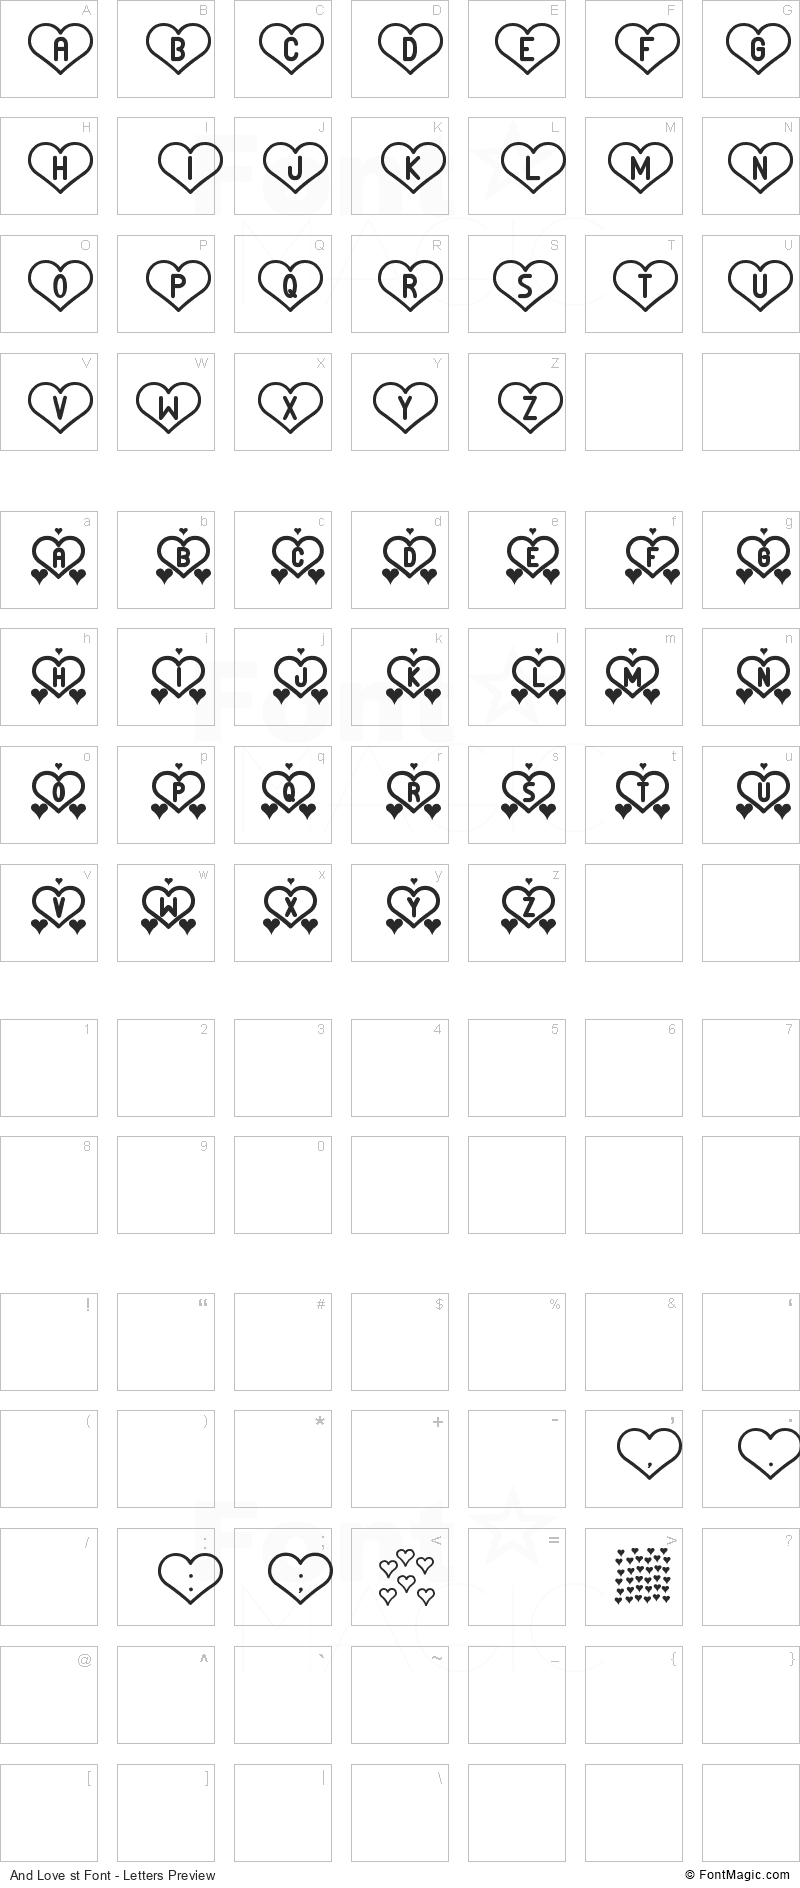 And Love st Font - All Latters Preview Chart